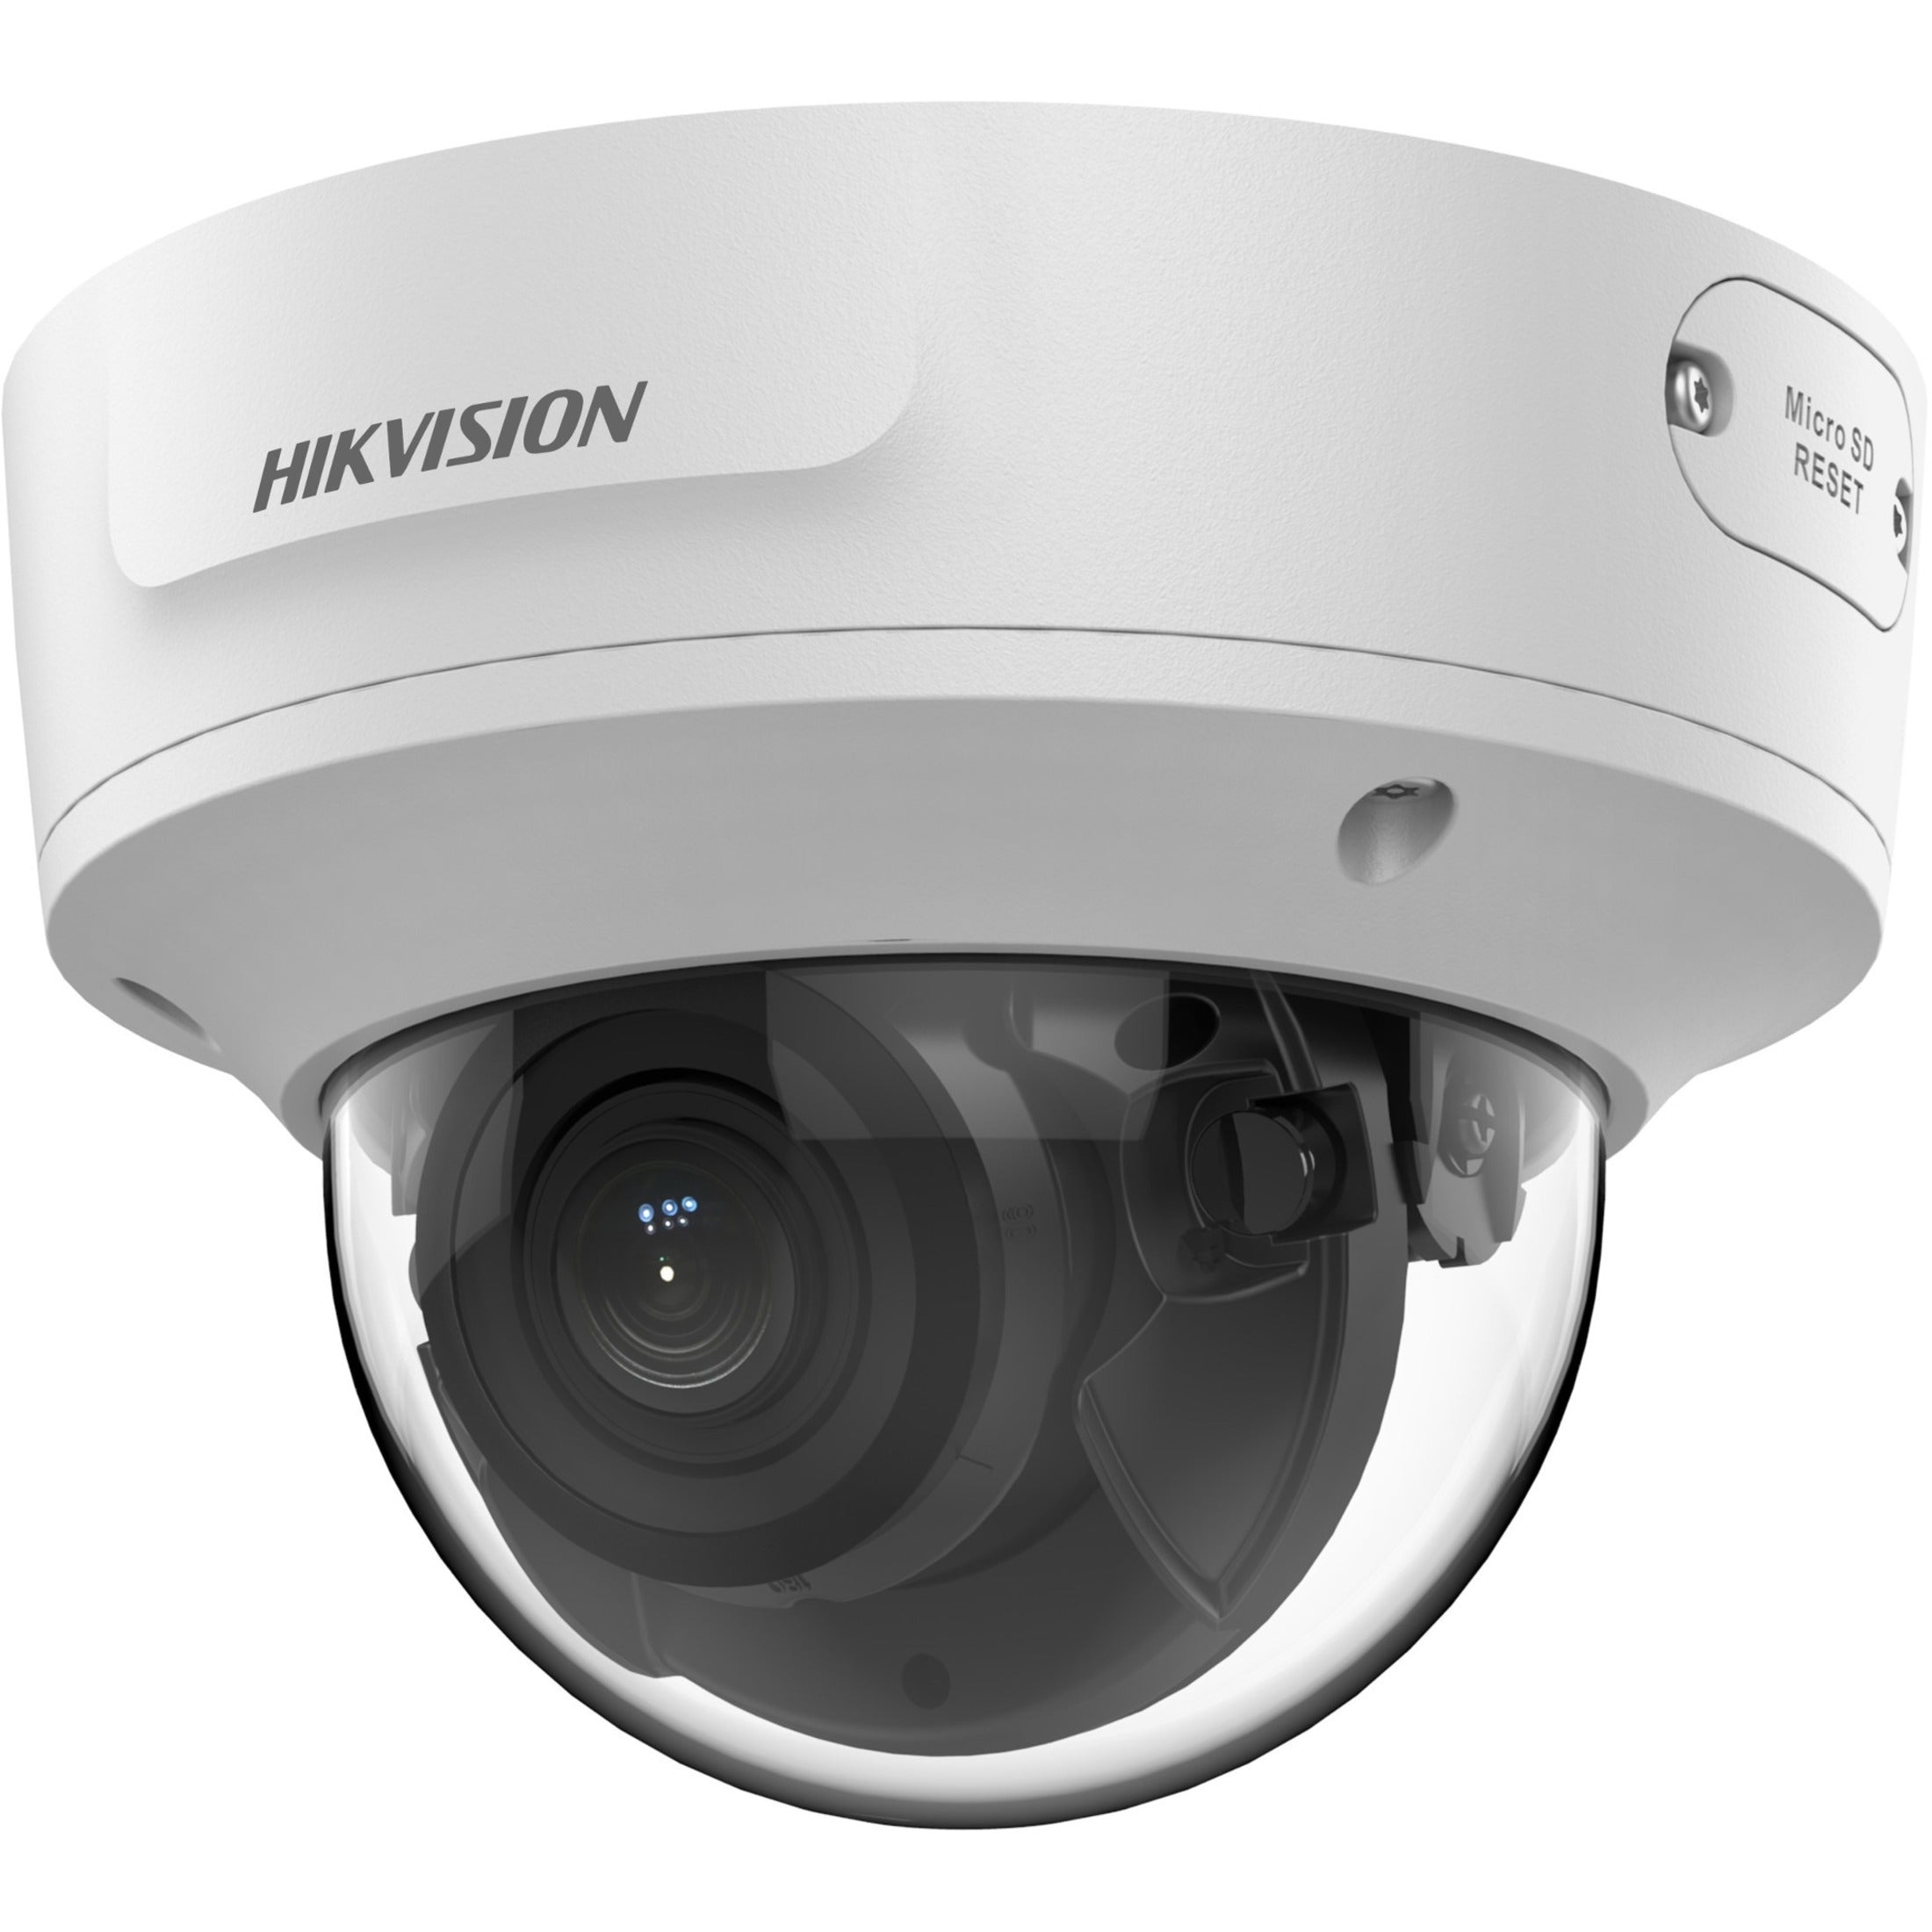 Hikvision DS-2CD2723G2-IZS 2 MP AcuSense Motorized Varifocal Dome Network Camera, Full HD, Outdoor